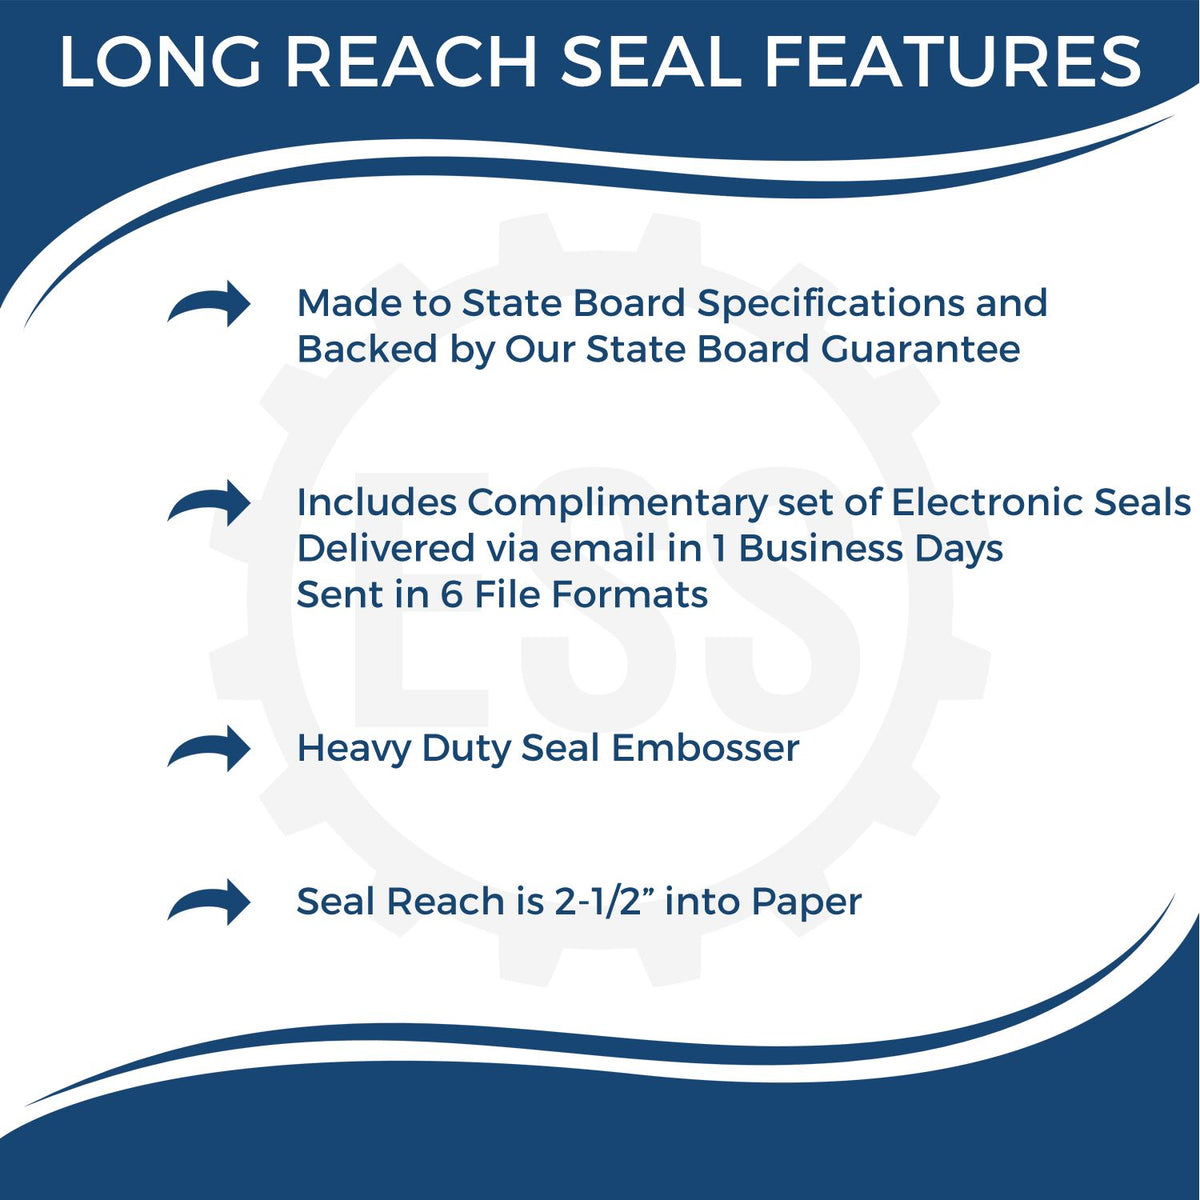 A picture of an infographic highlighting the selling points for the Long Reach Maryland PE Seal